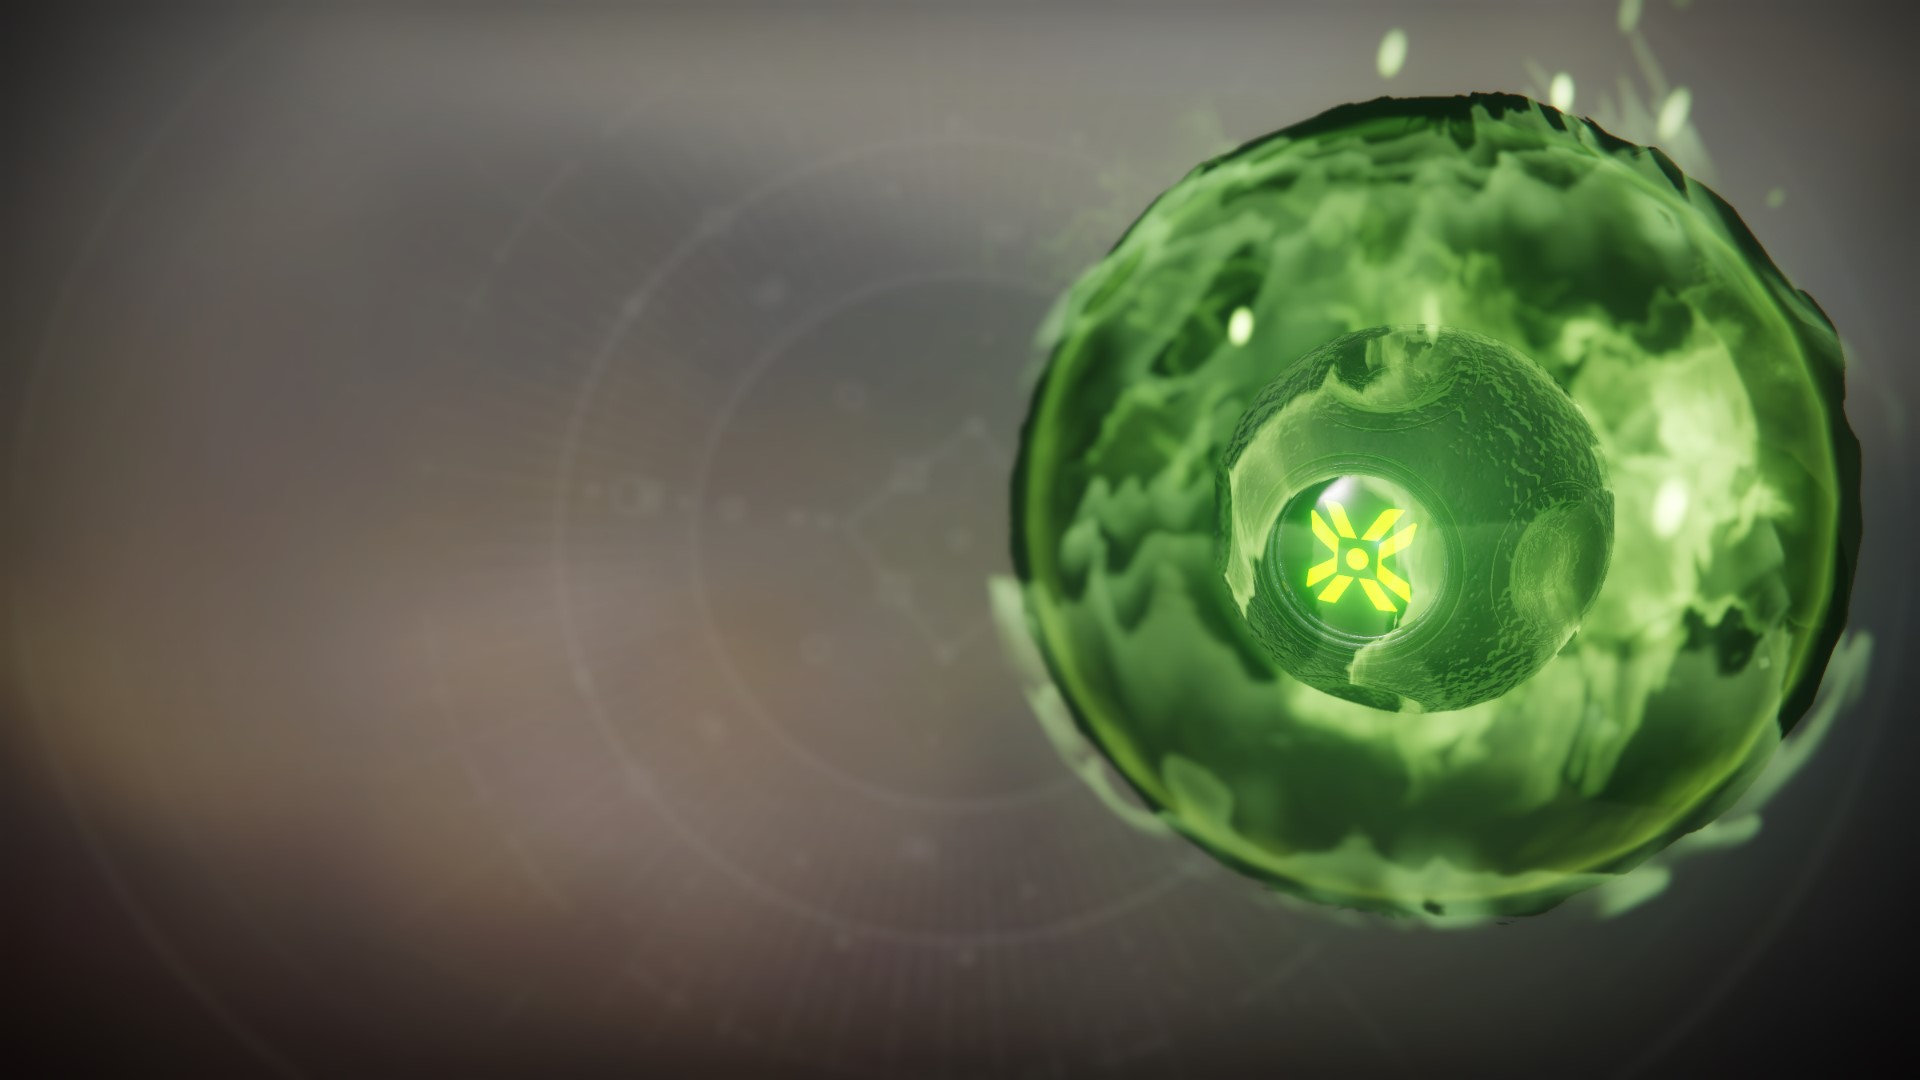 An in-game render of the Eris Morn Shell.